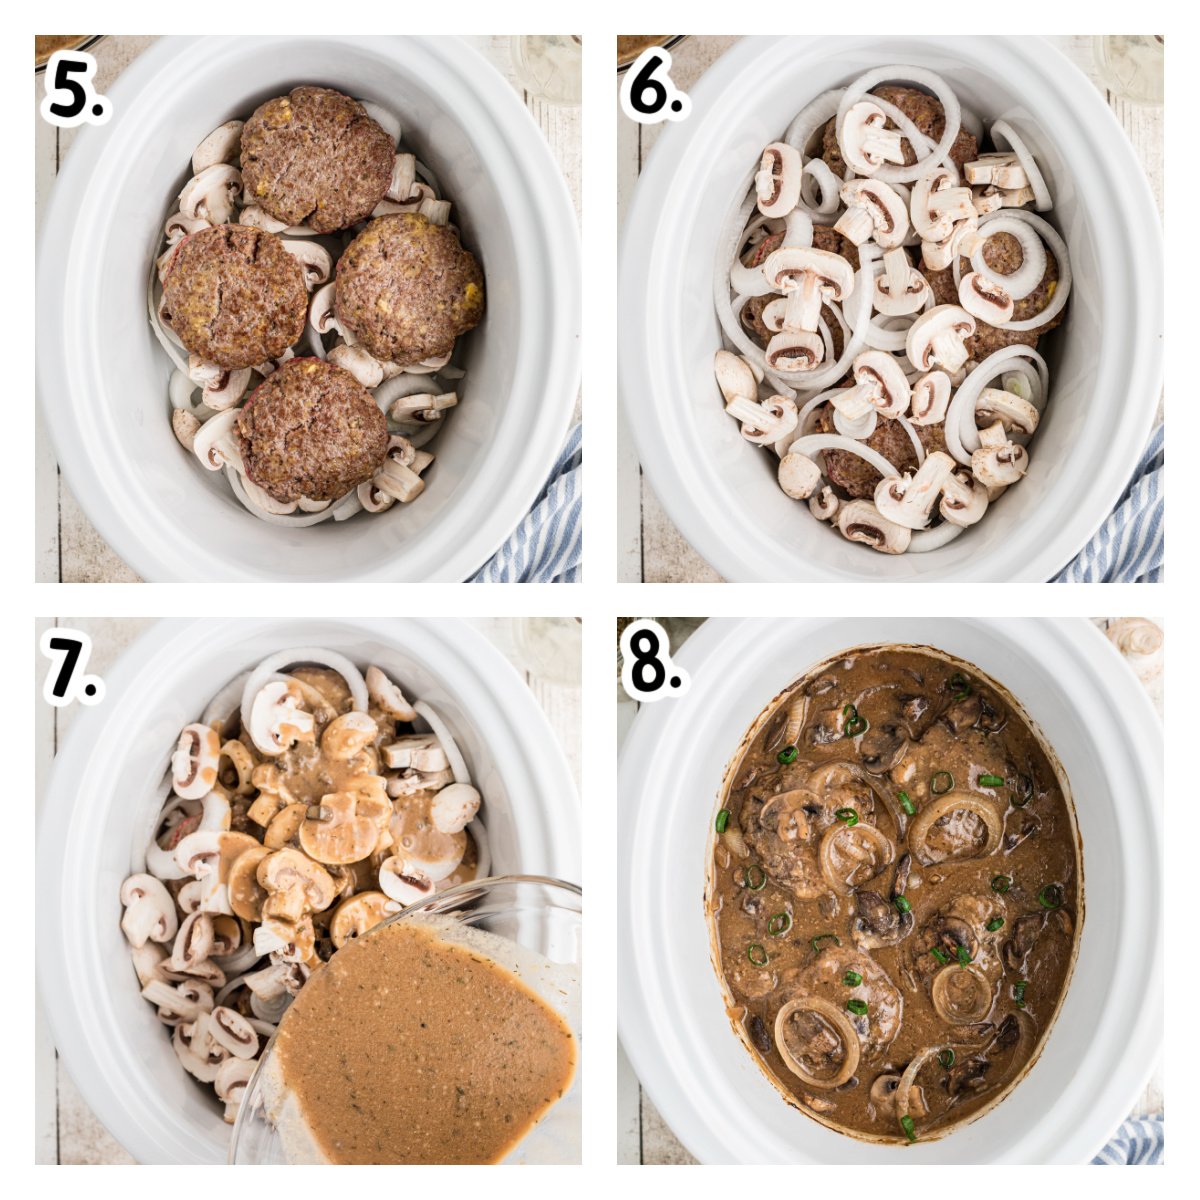 Four more images showing how to finish making salisbury steak in a slow cooker.